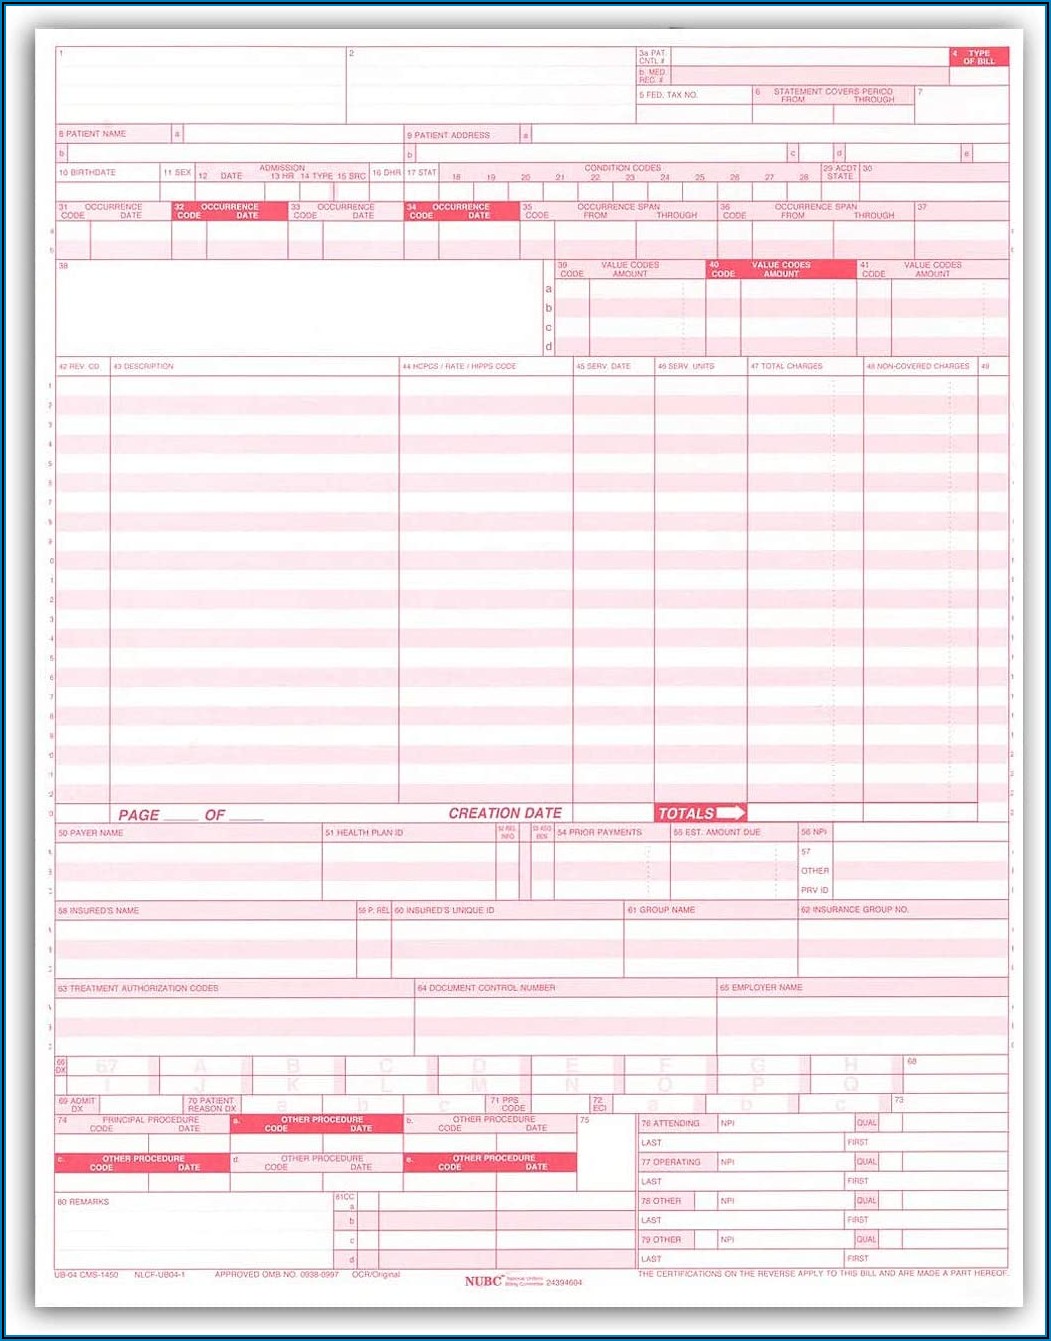 Picture Of Ub 04 Claim Form